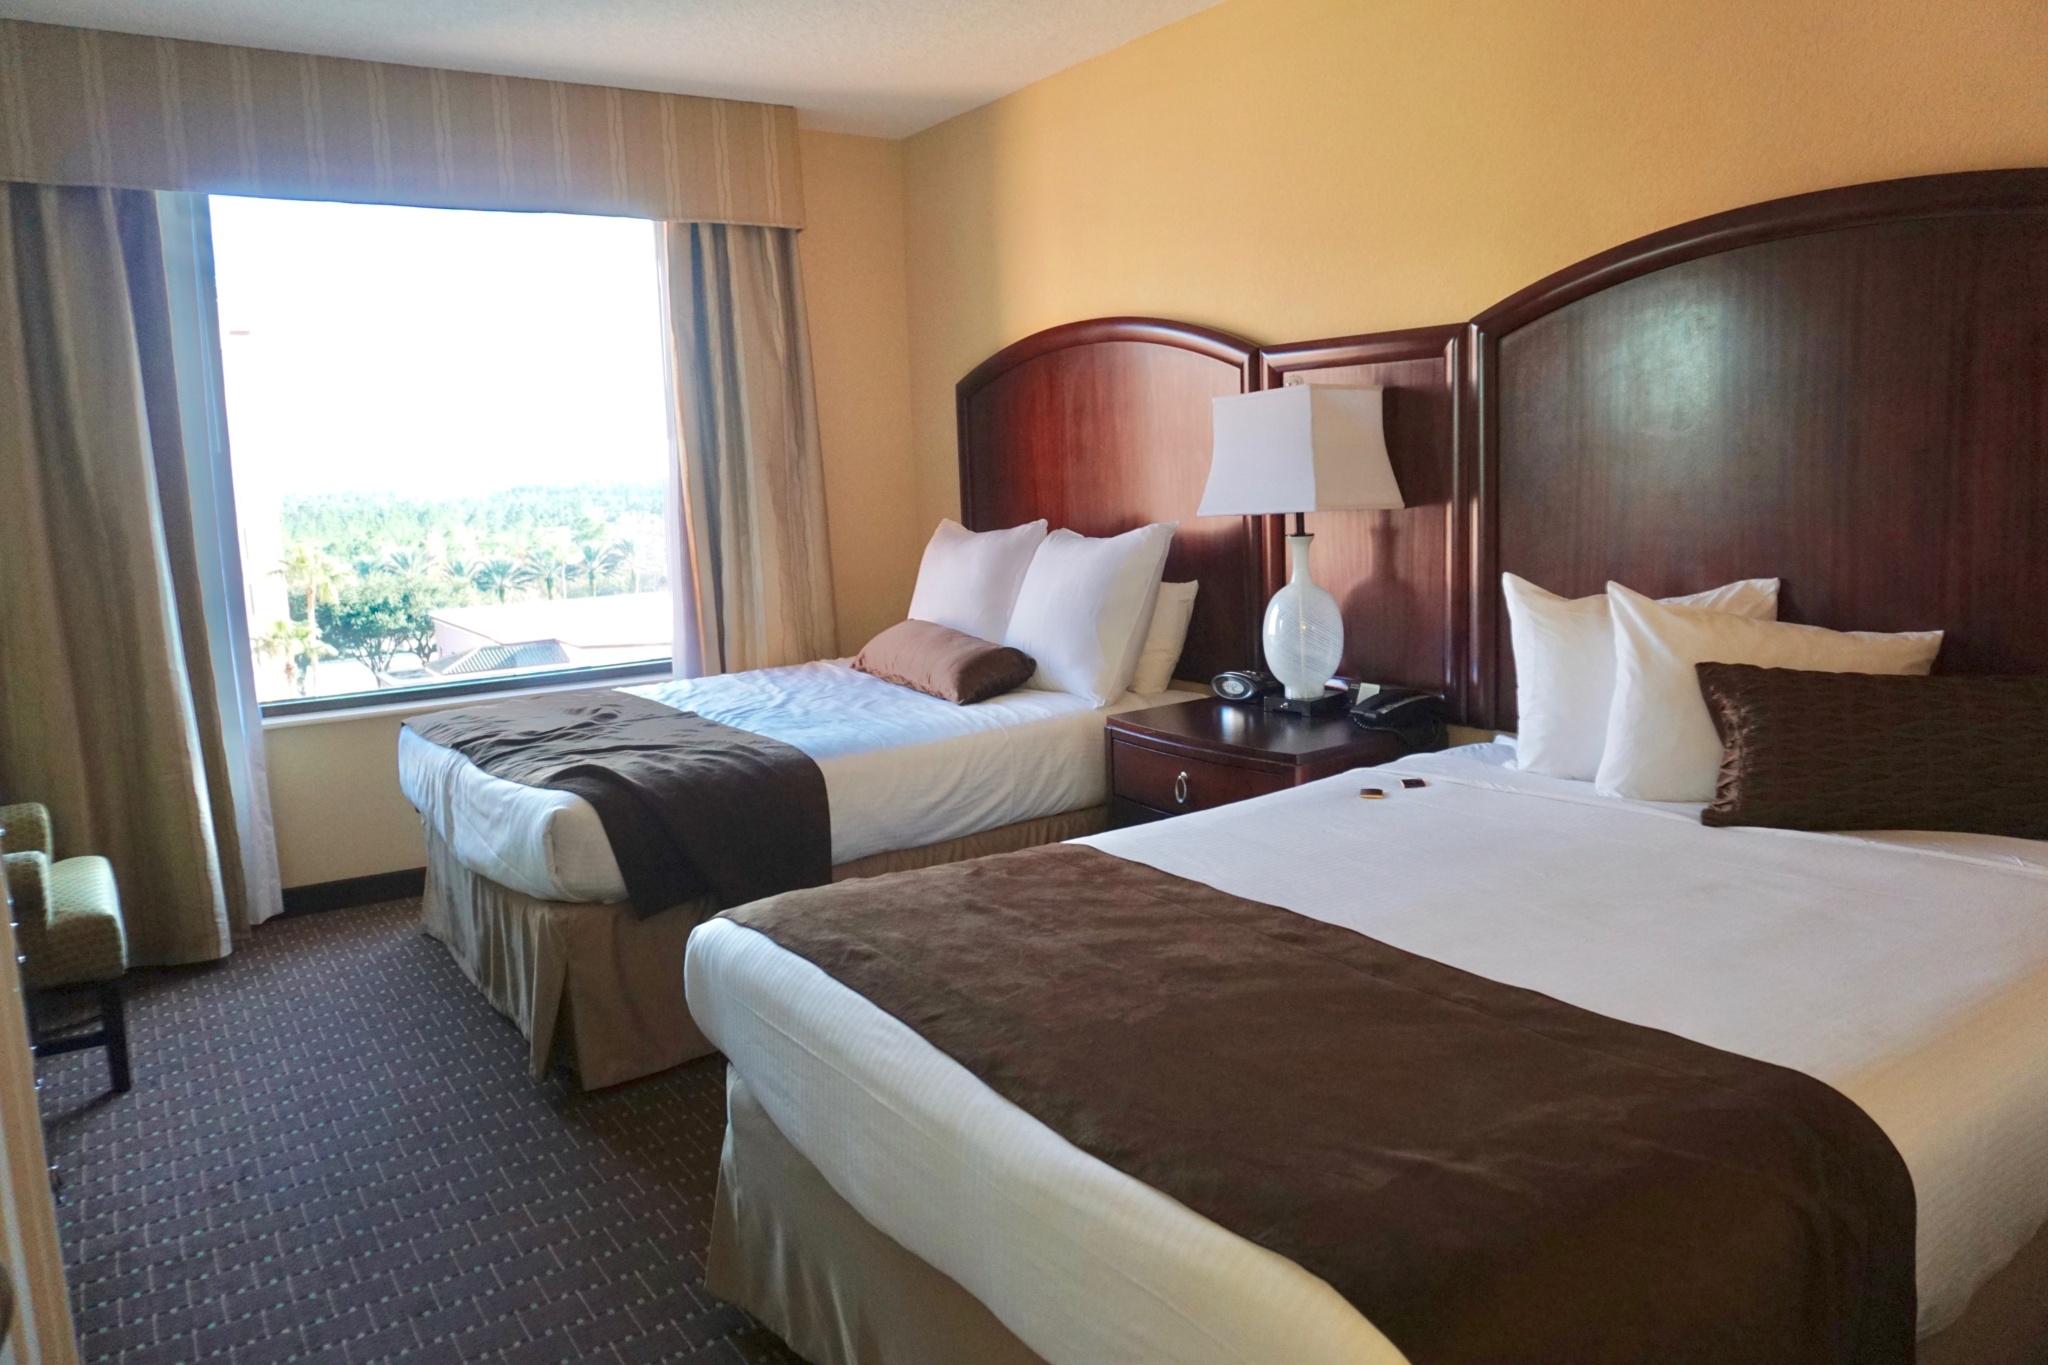 Orlando Family Getaway At Caribe Royale All-Suite Hotel 